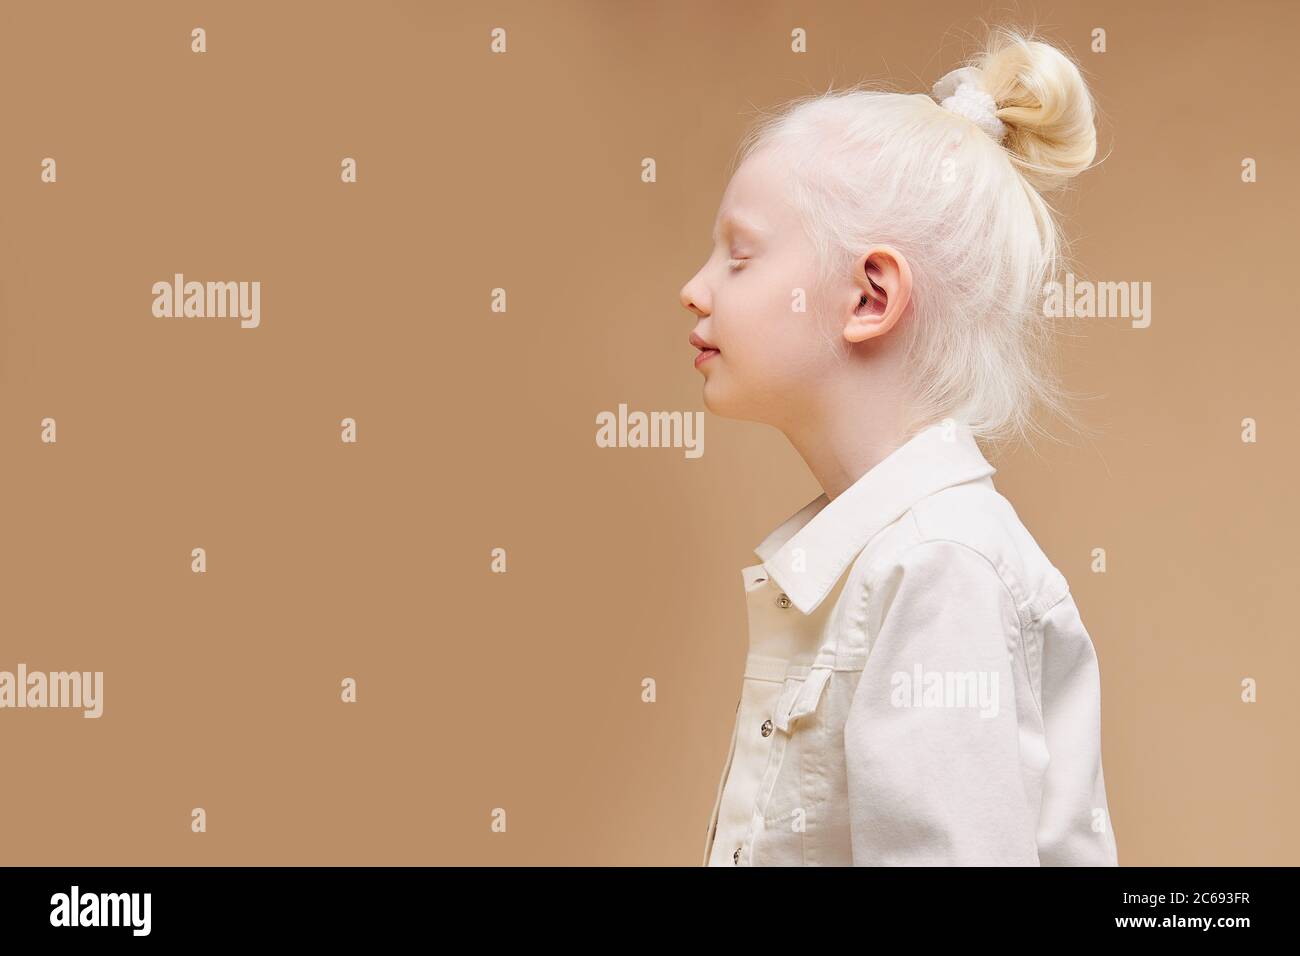 side view on strange little caucasian girl with unusual appearance, she has pale skin and white hair, alien concept. natural beauty, people diversity Stock Photo